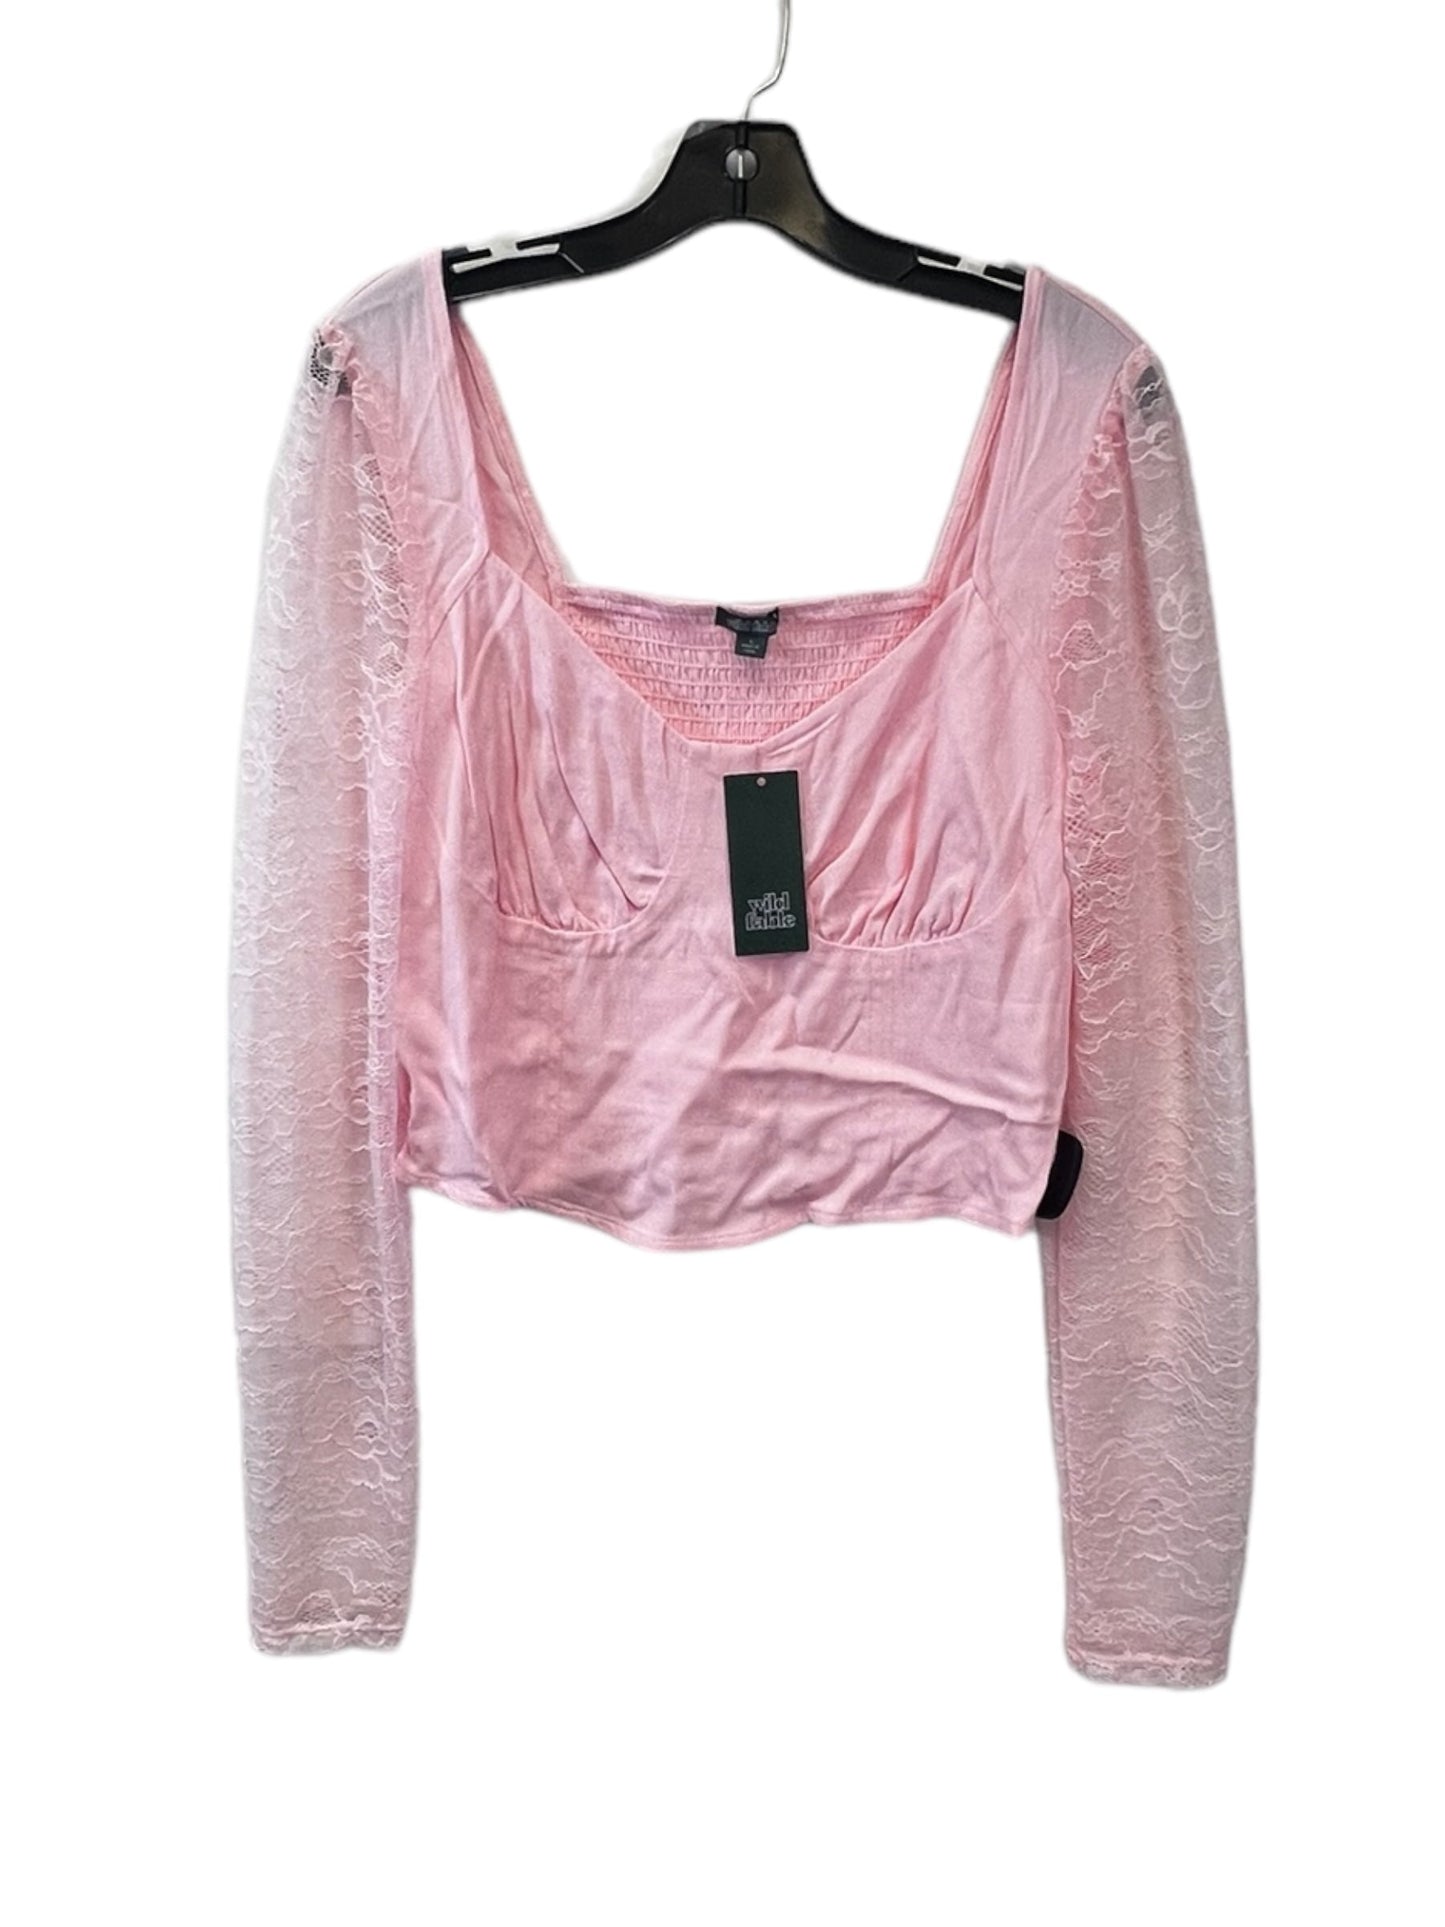 Pink Top Long Sleeve Wild Fable, Size L